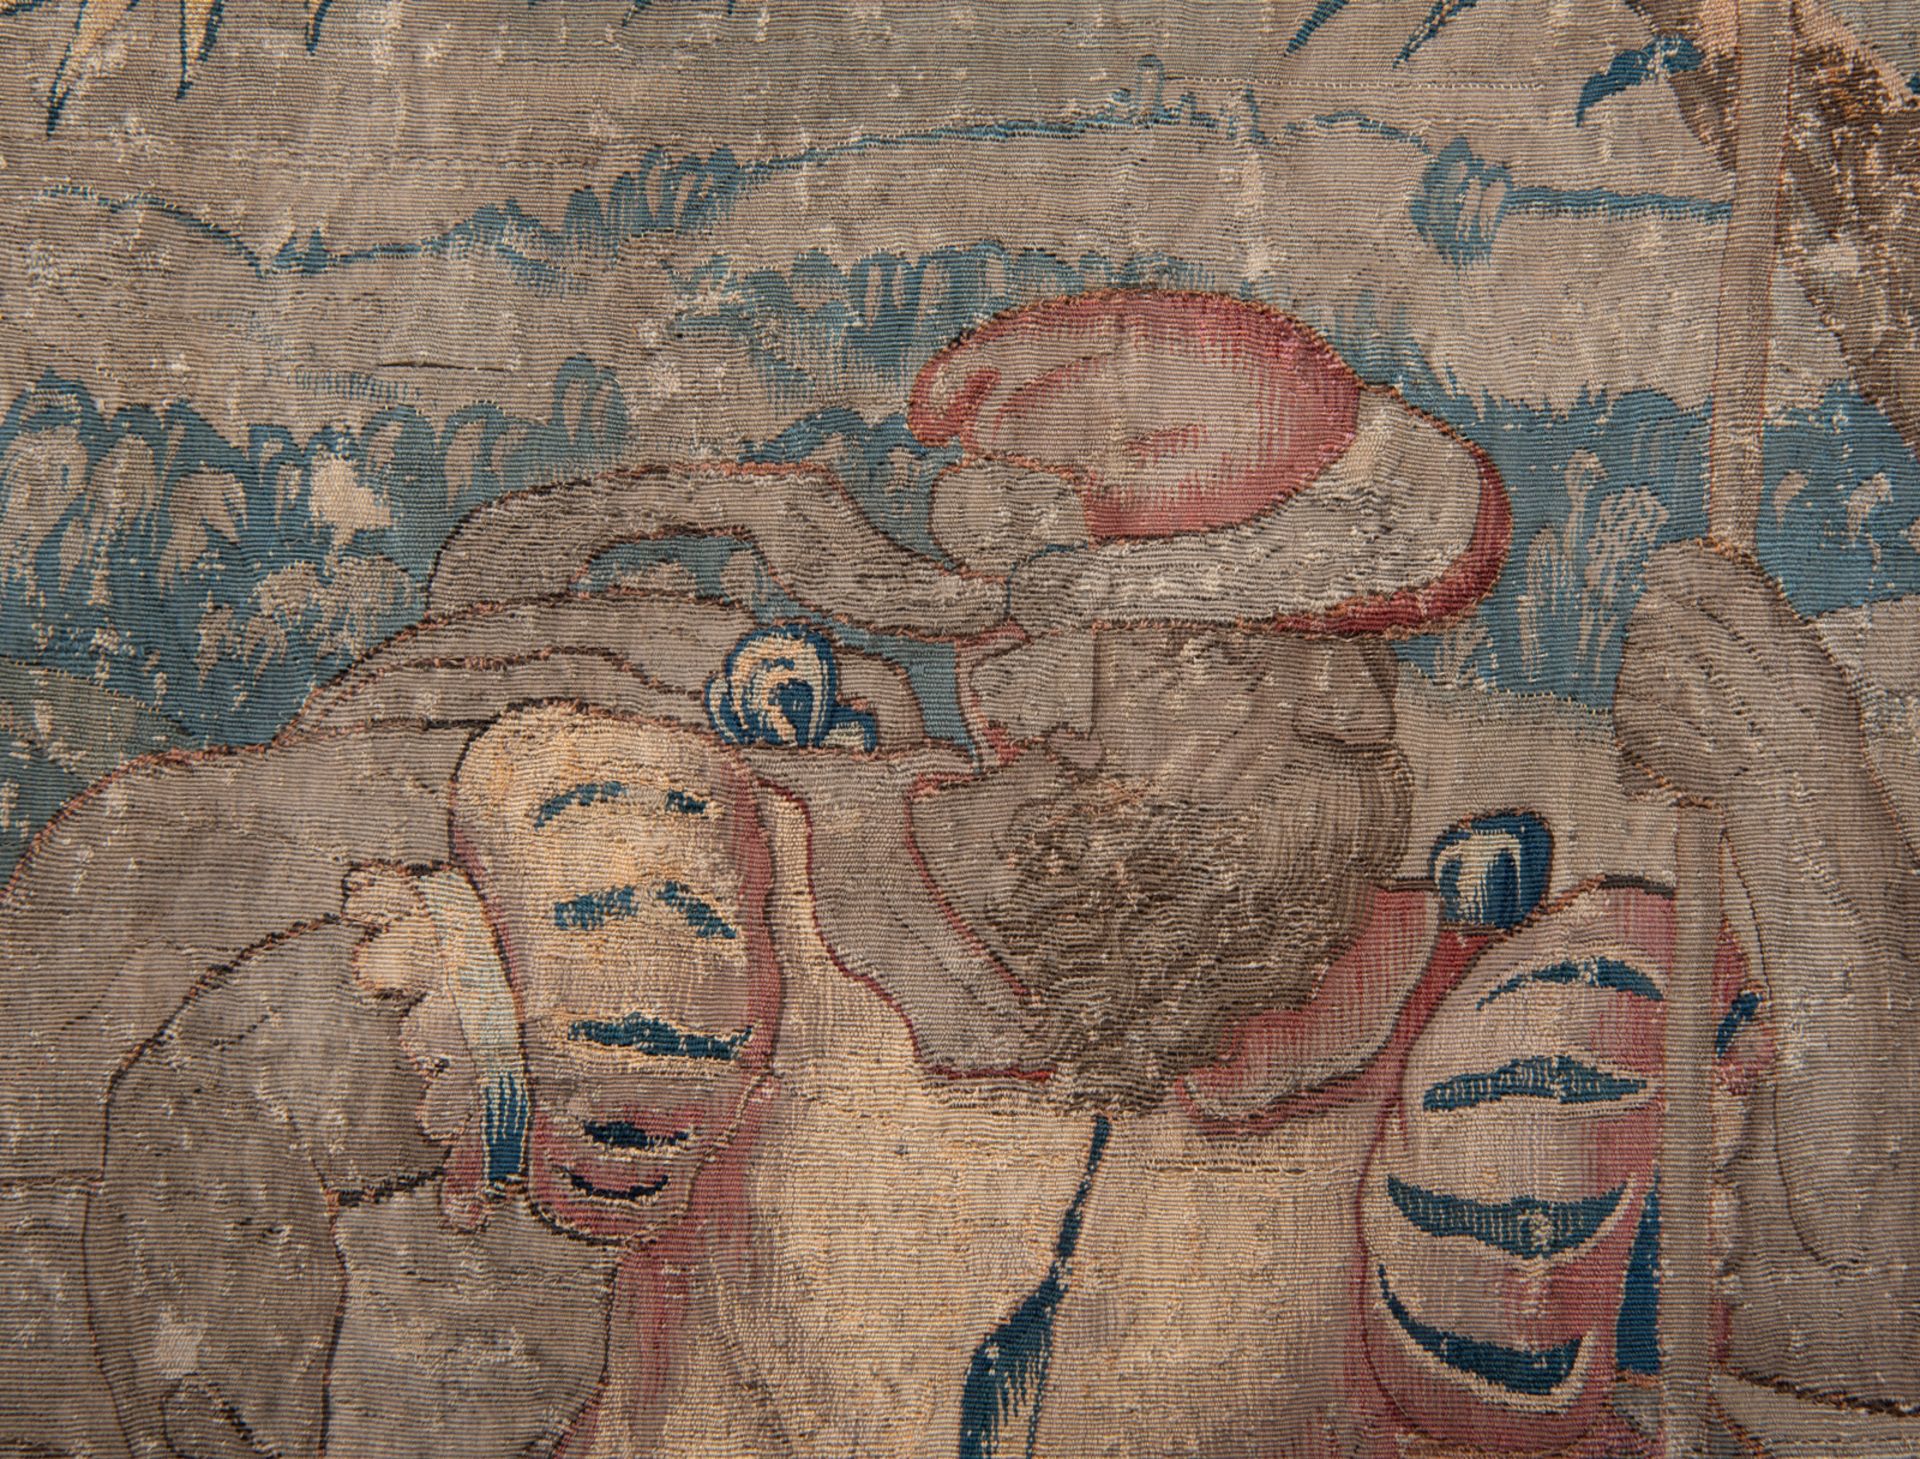 A fragment of a Flemish wall tapestry depicting fleeing figures, probably from a Brussels workshop, - Image 3 of 3